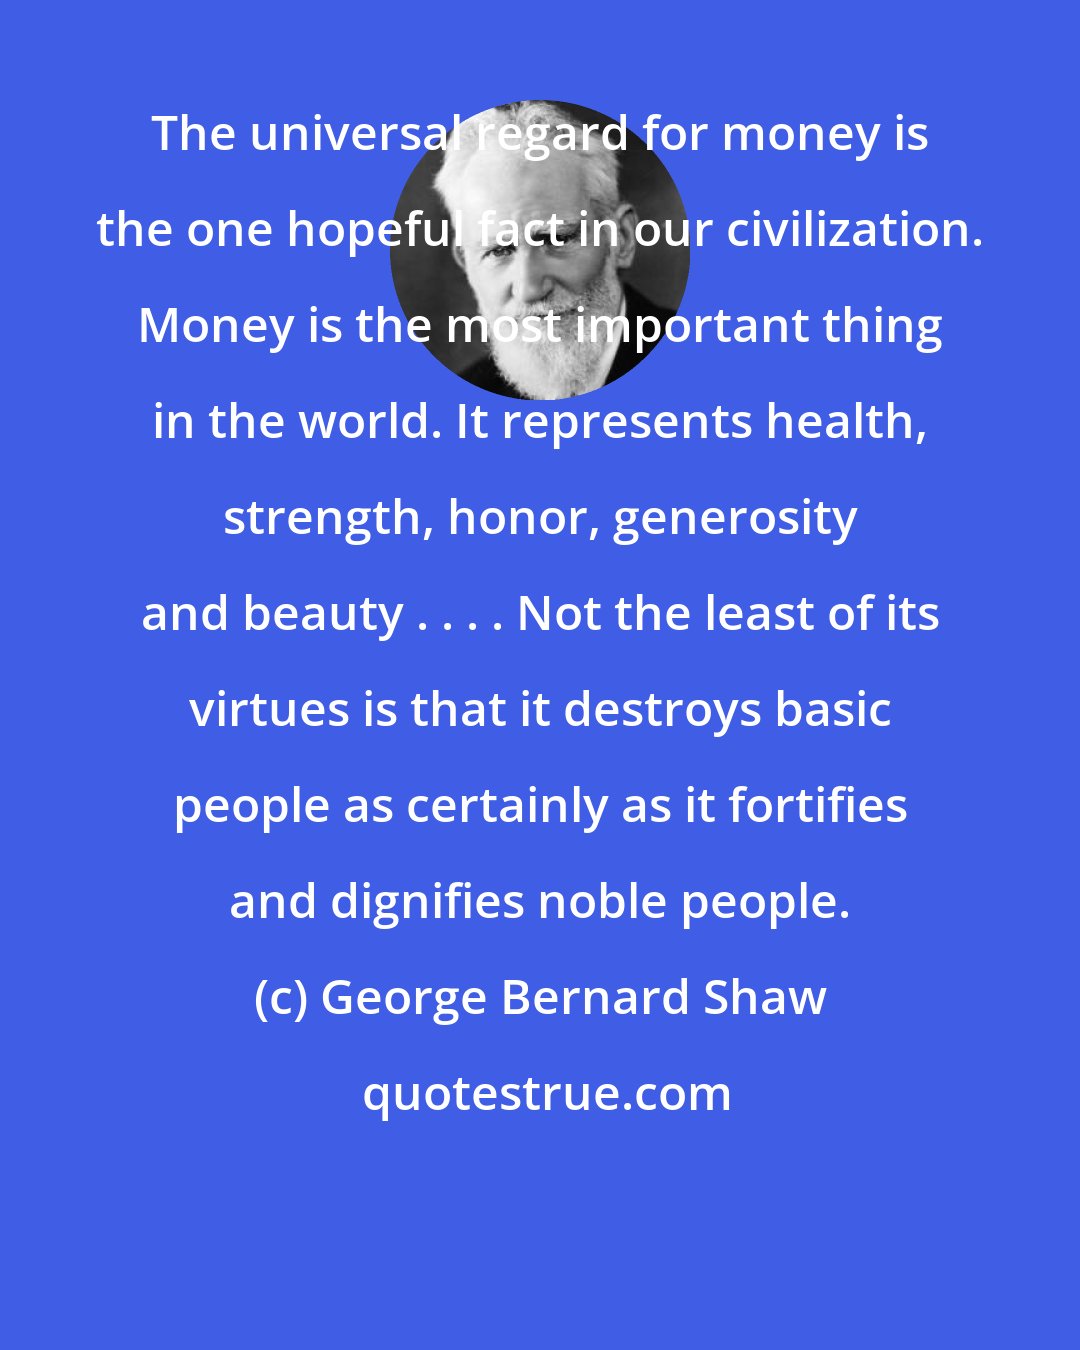 George Bernard Shaw: The universal regard for money is the one hopeful fact in our civilization. Money is the most important thing in the world. It represents health, strength, honor, generosity and beauty . . . . Not the least of its virtues is that it destroys basic people as certainly as it fortifies and dignifies noble people.